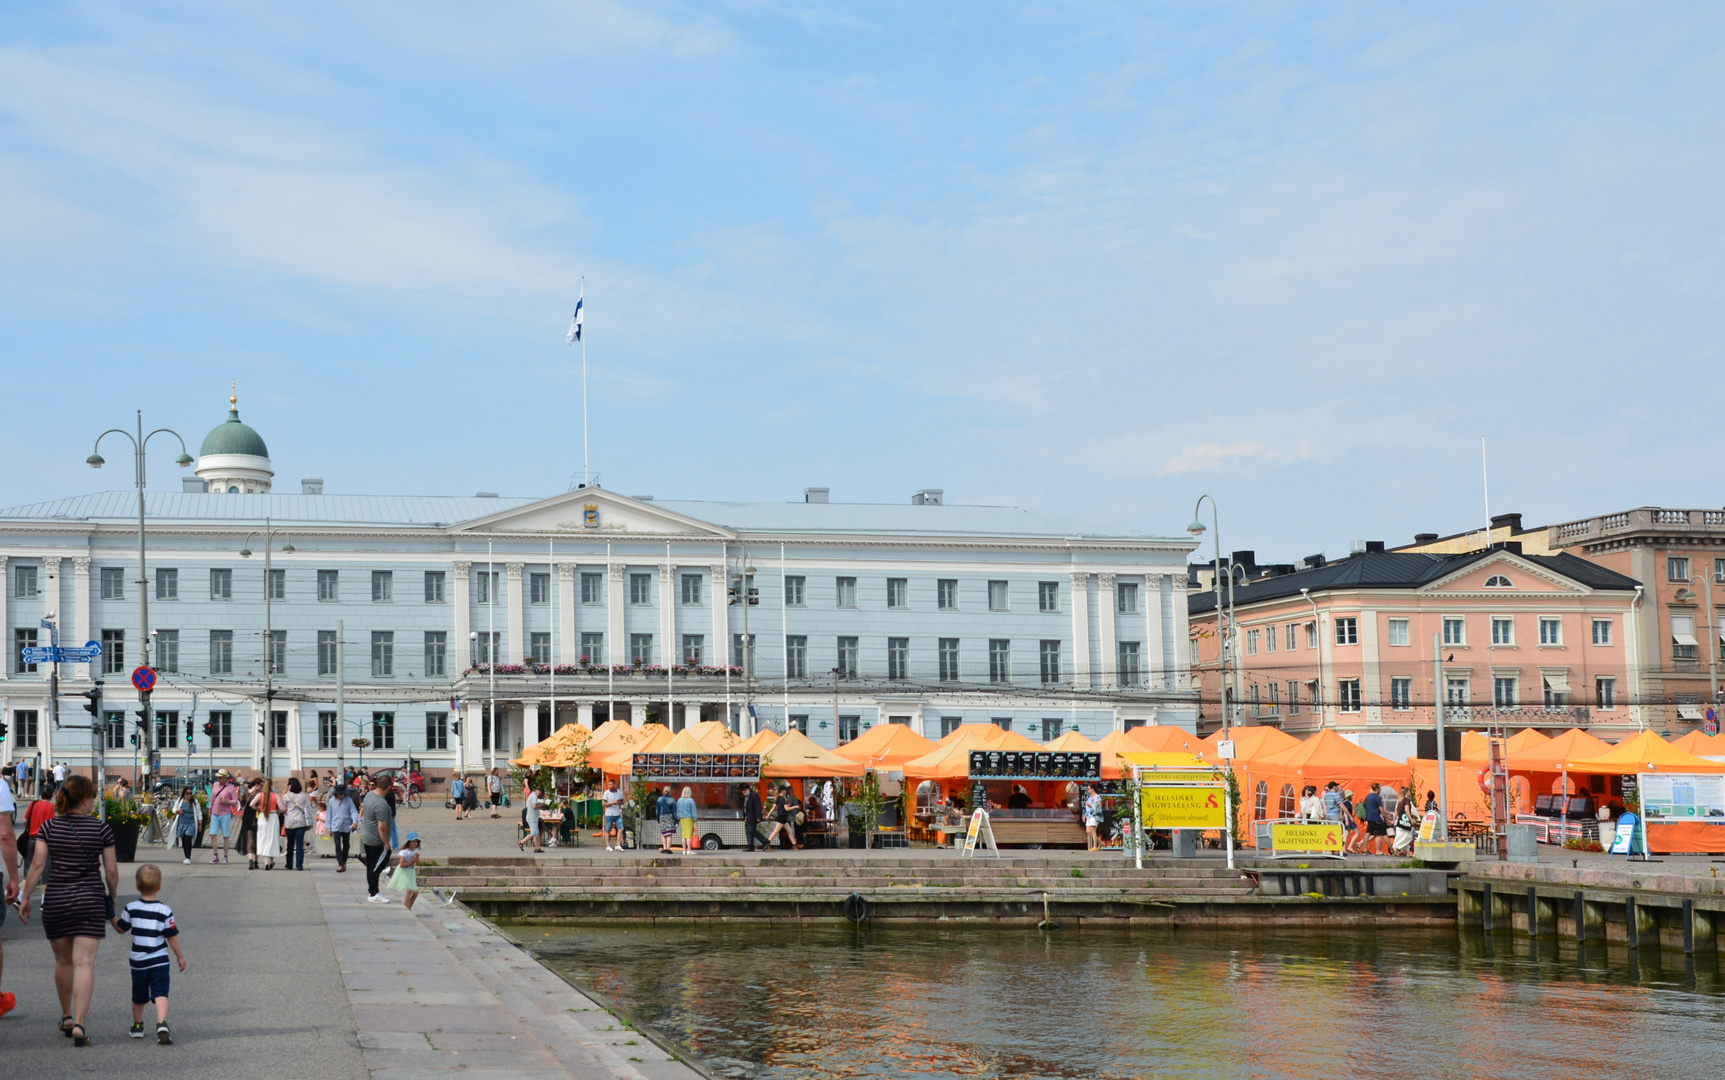 The city hall and the market square